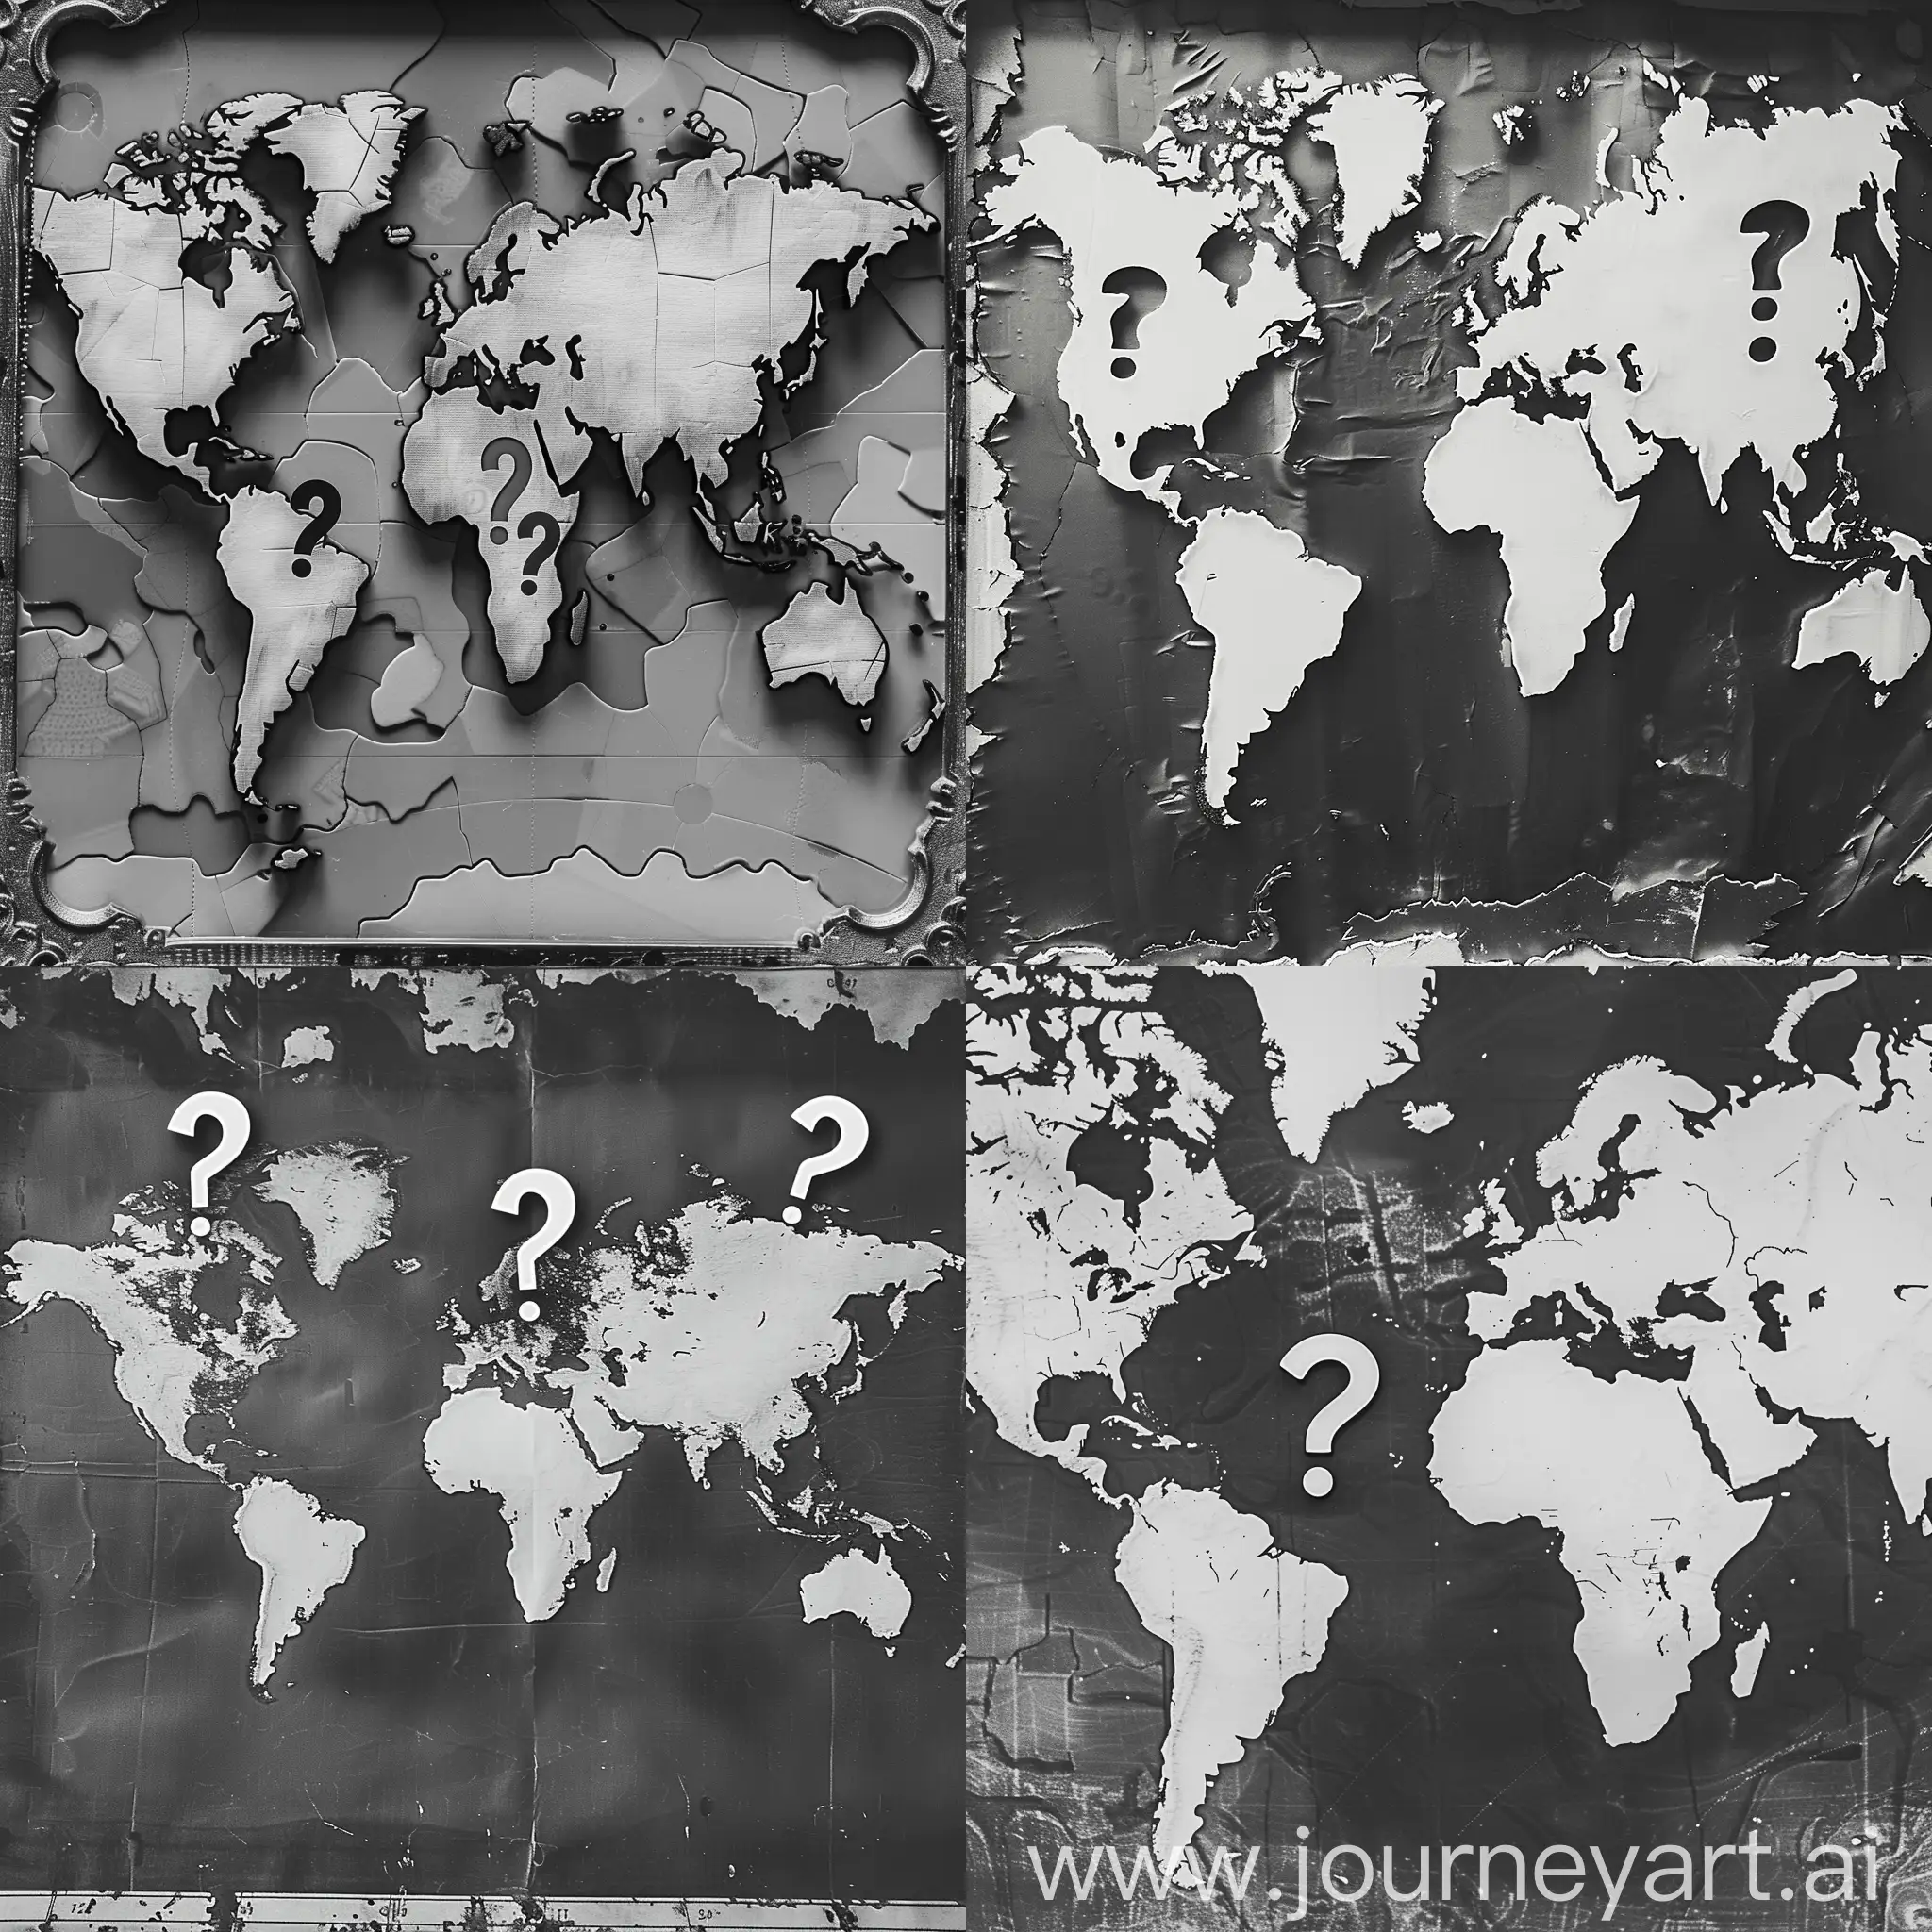 Global-Mystery-Monochromatic-Map-with-Continent-Question-Marks